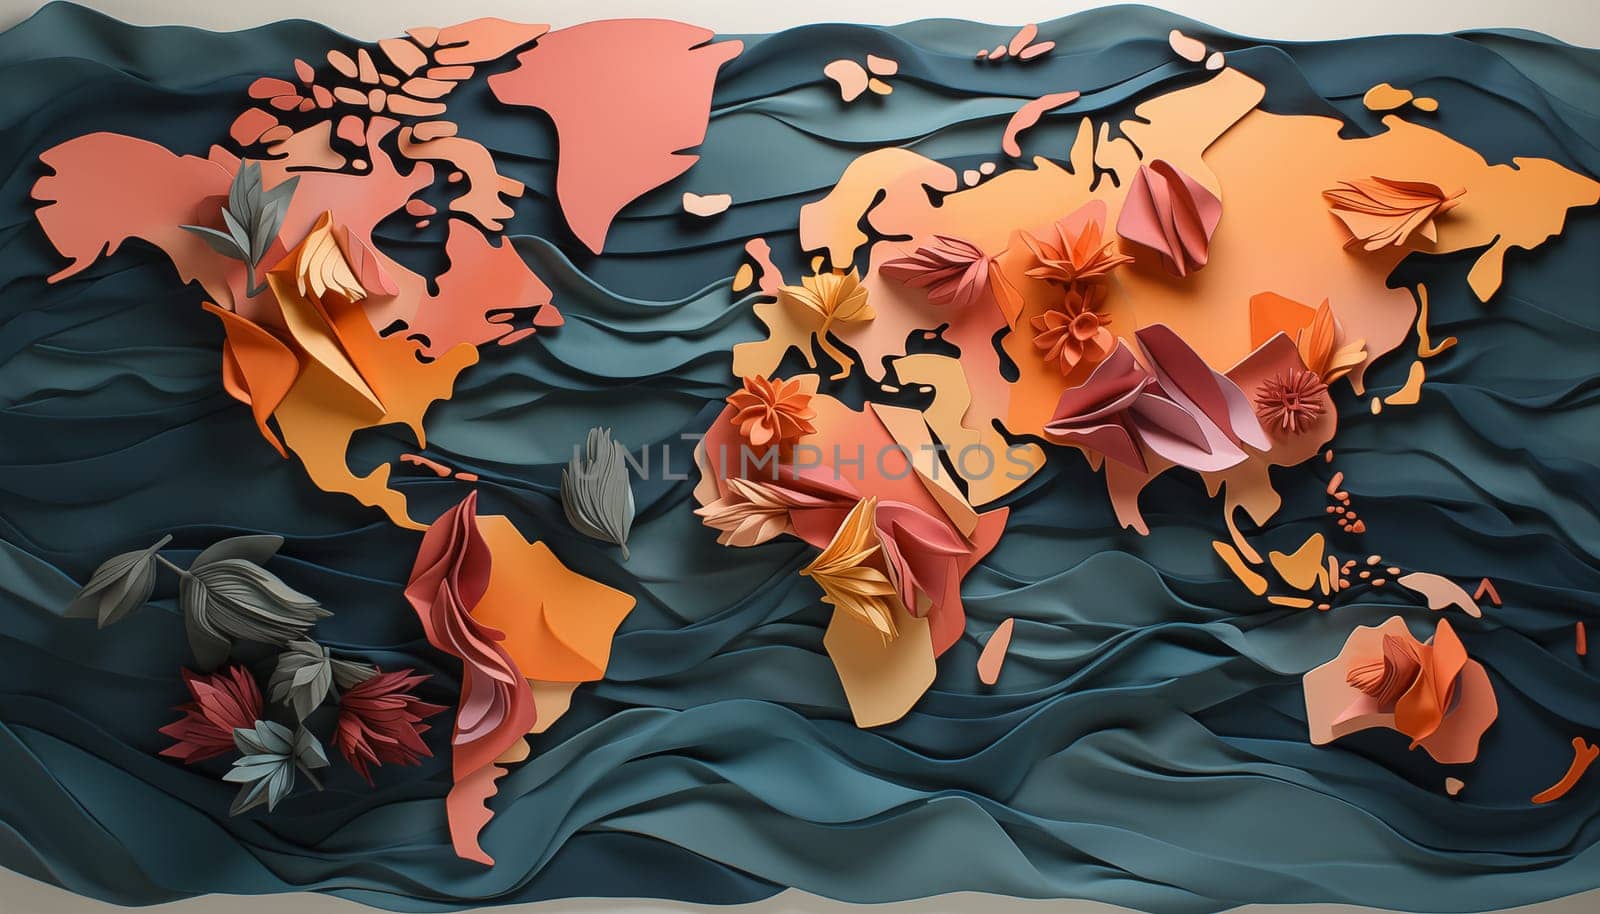 World map - abstract background by Nadtochiy